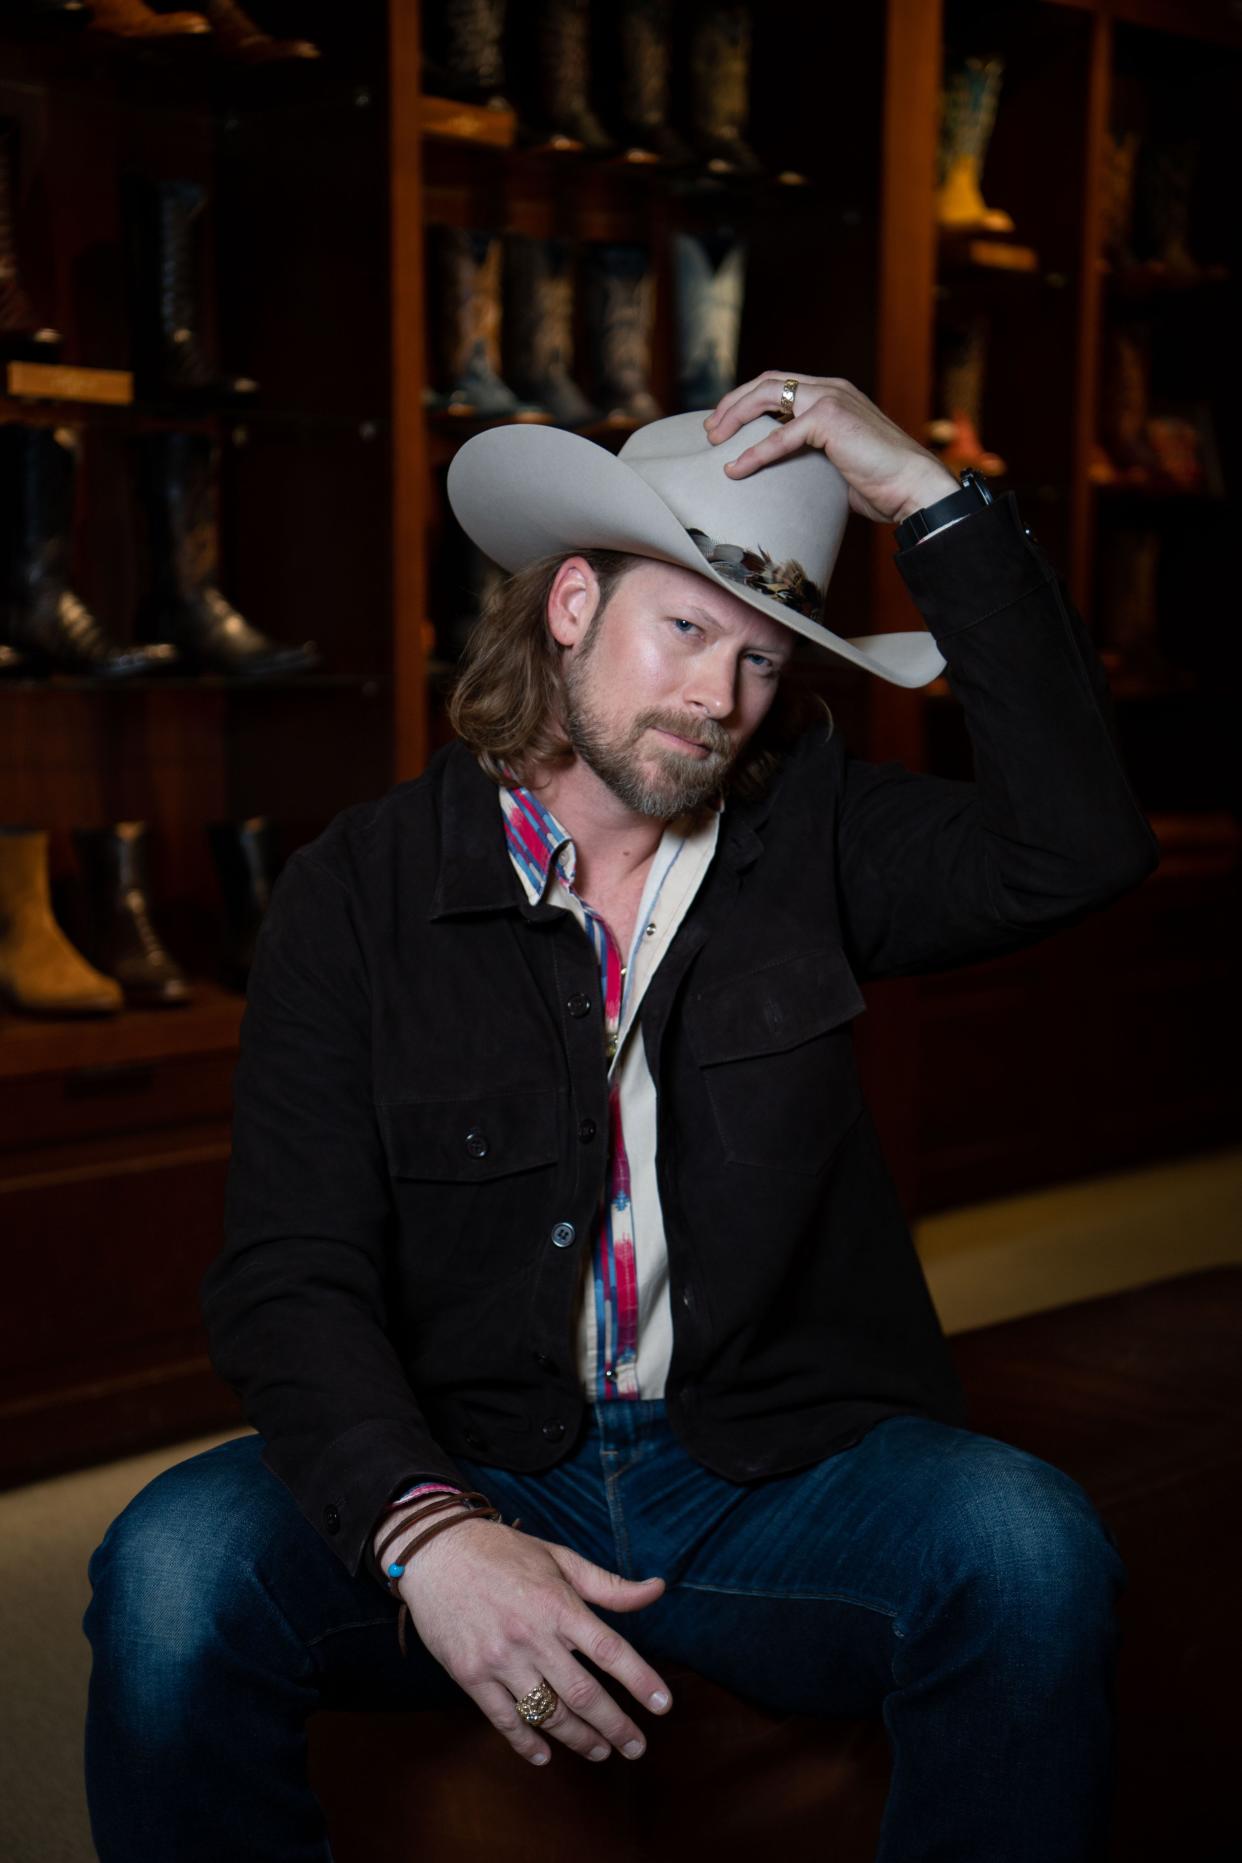 Brian Kelley poses for a photograph at Lucchese Boots in Nashville. He is releasing a new single “Kiss My boots” and promoting his new solo album "Tennessee Truth"